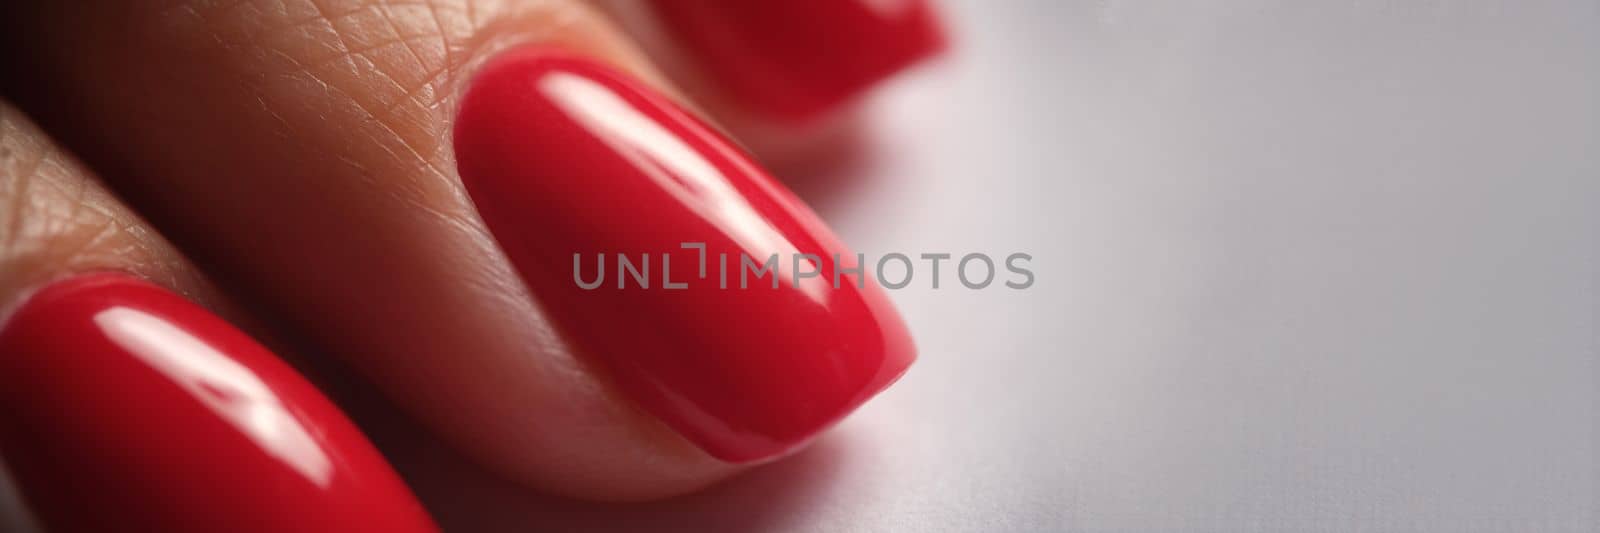 Beautiful red silk manicure on female nails by kuprevich